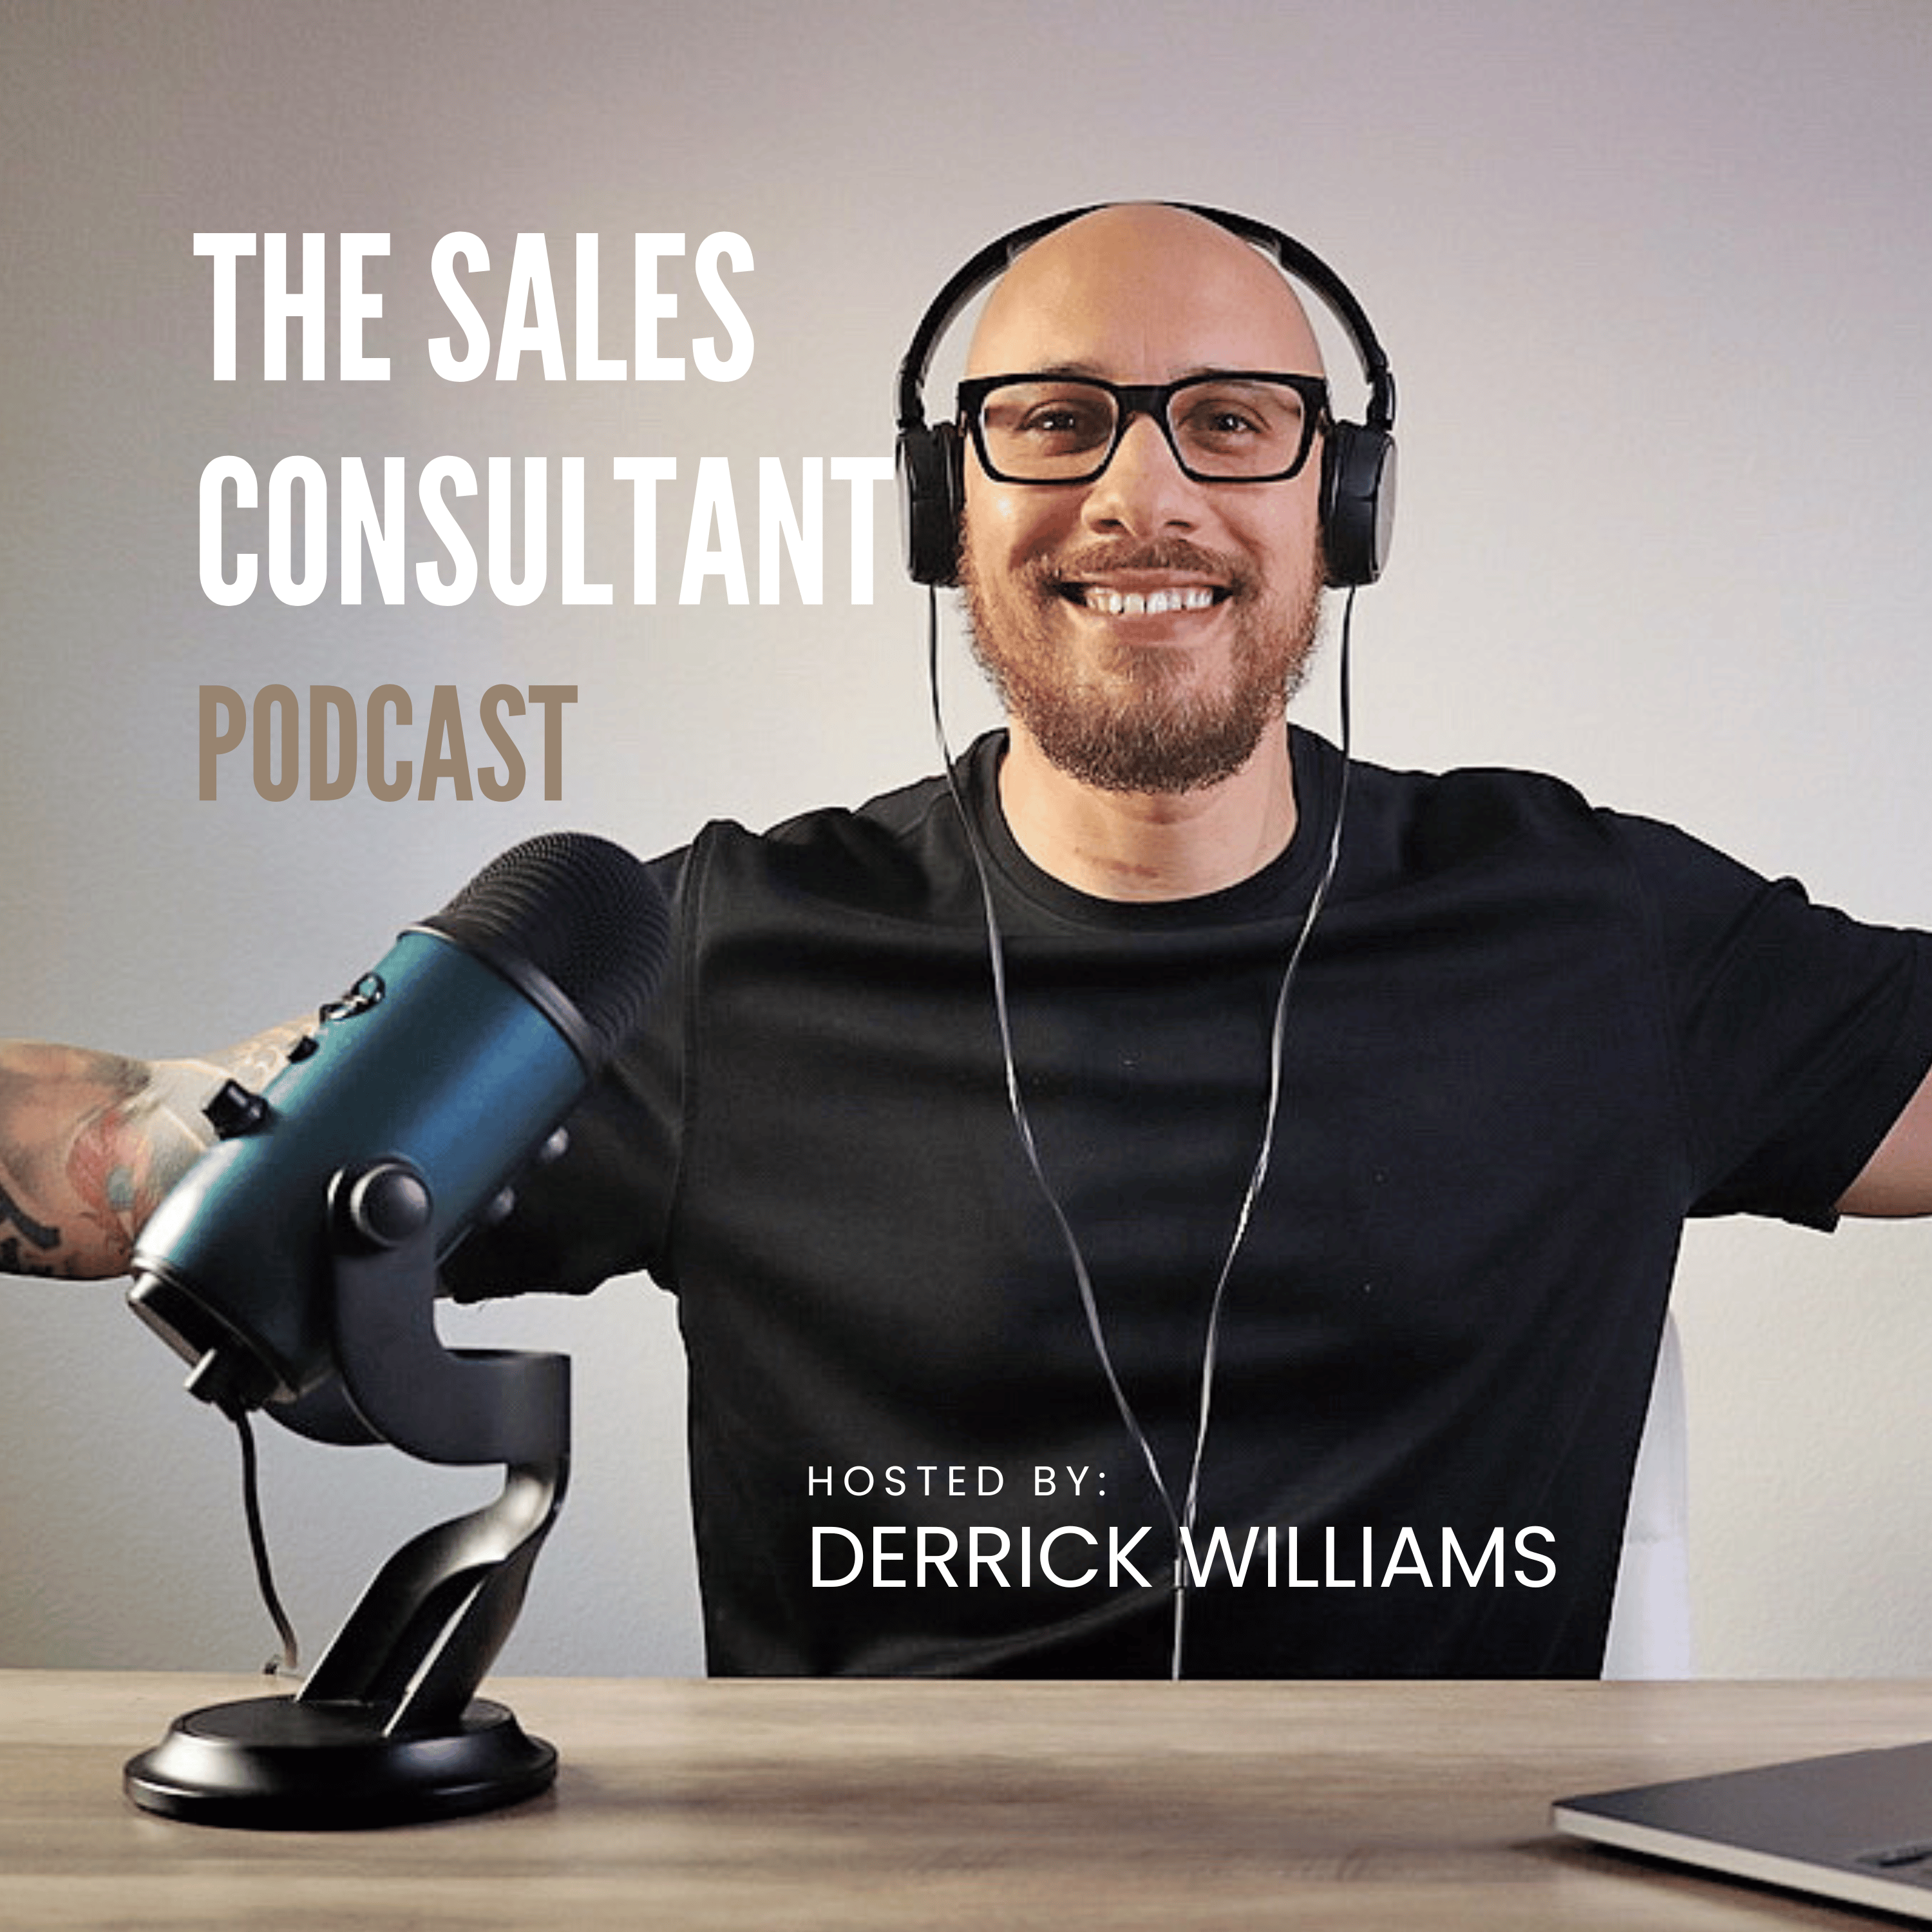 The Sales Consultant Podcast